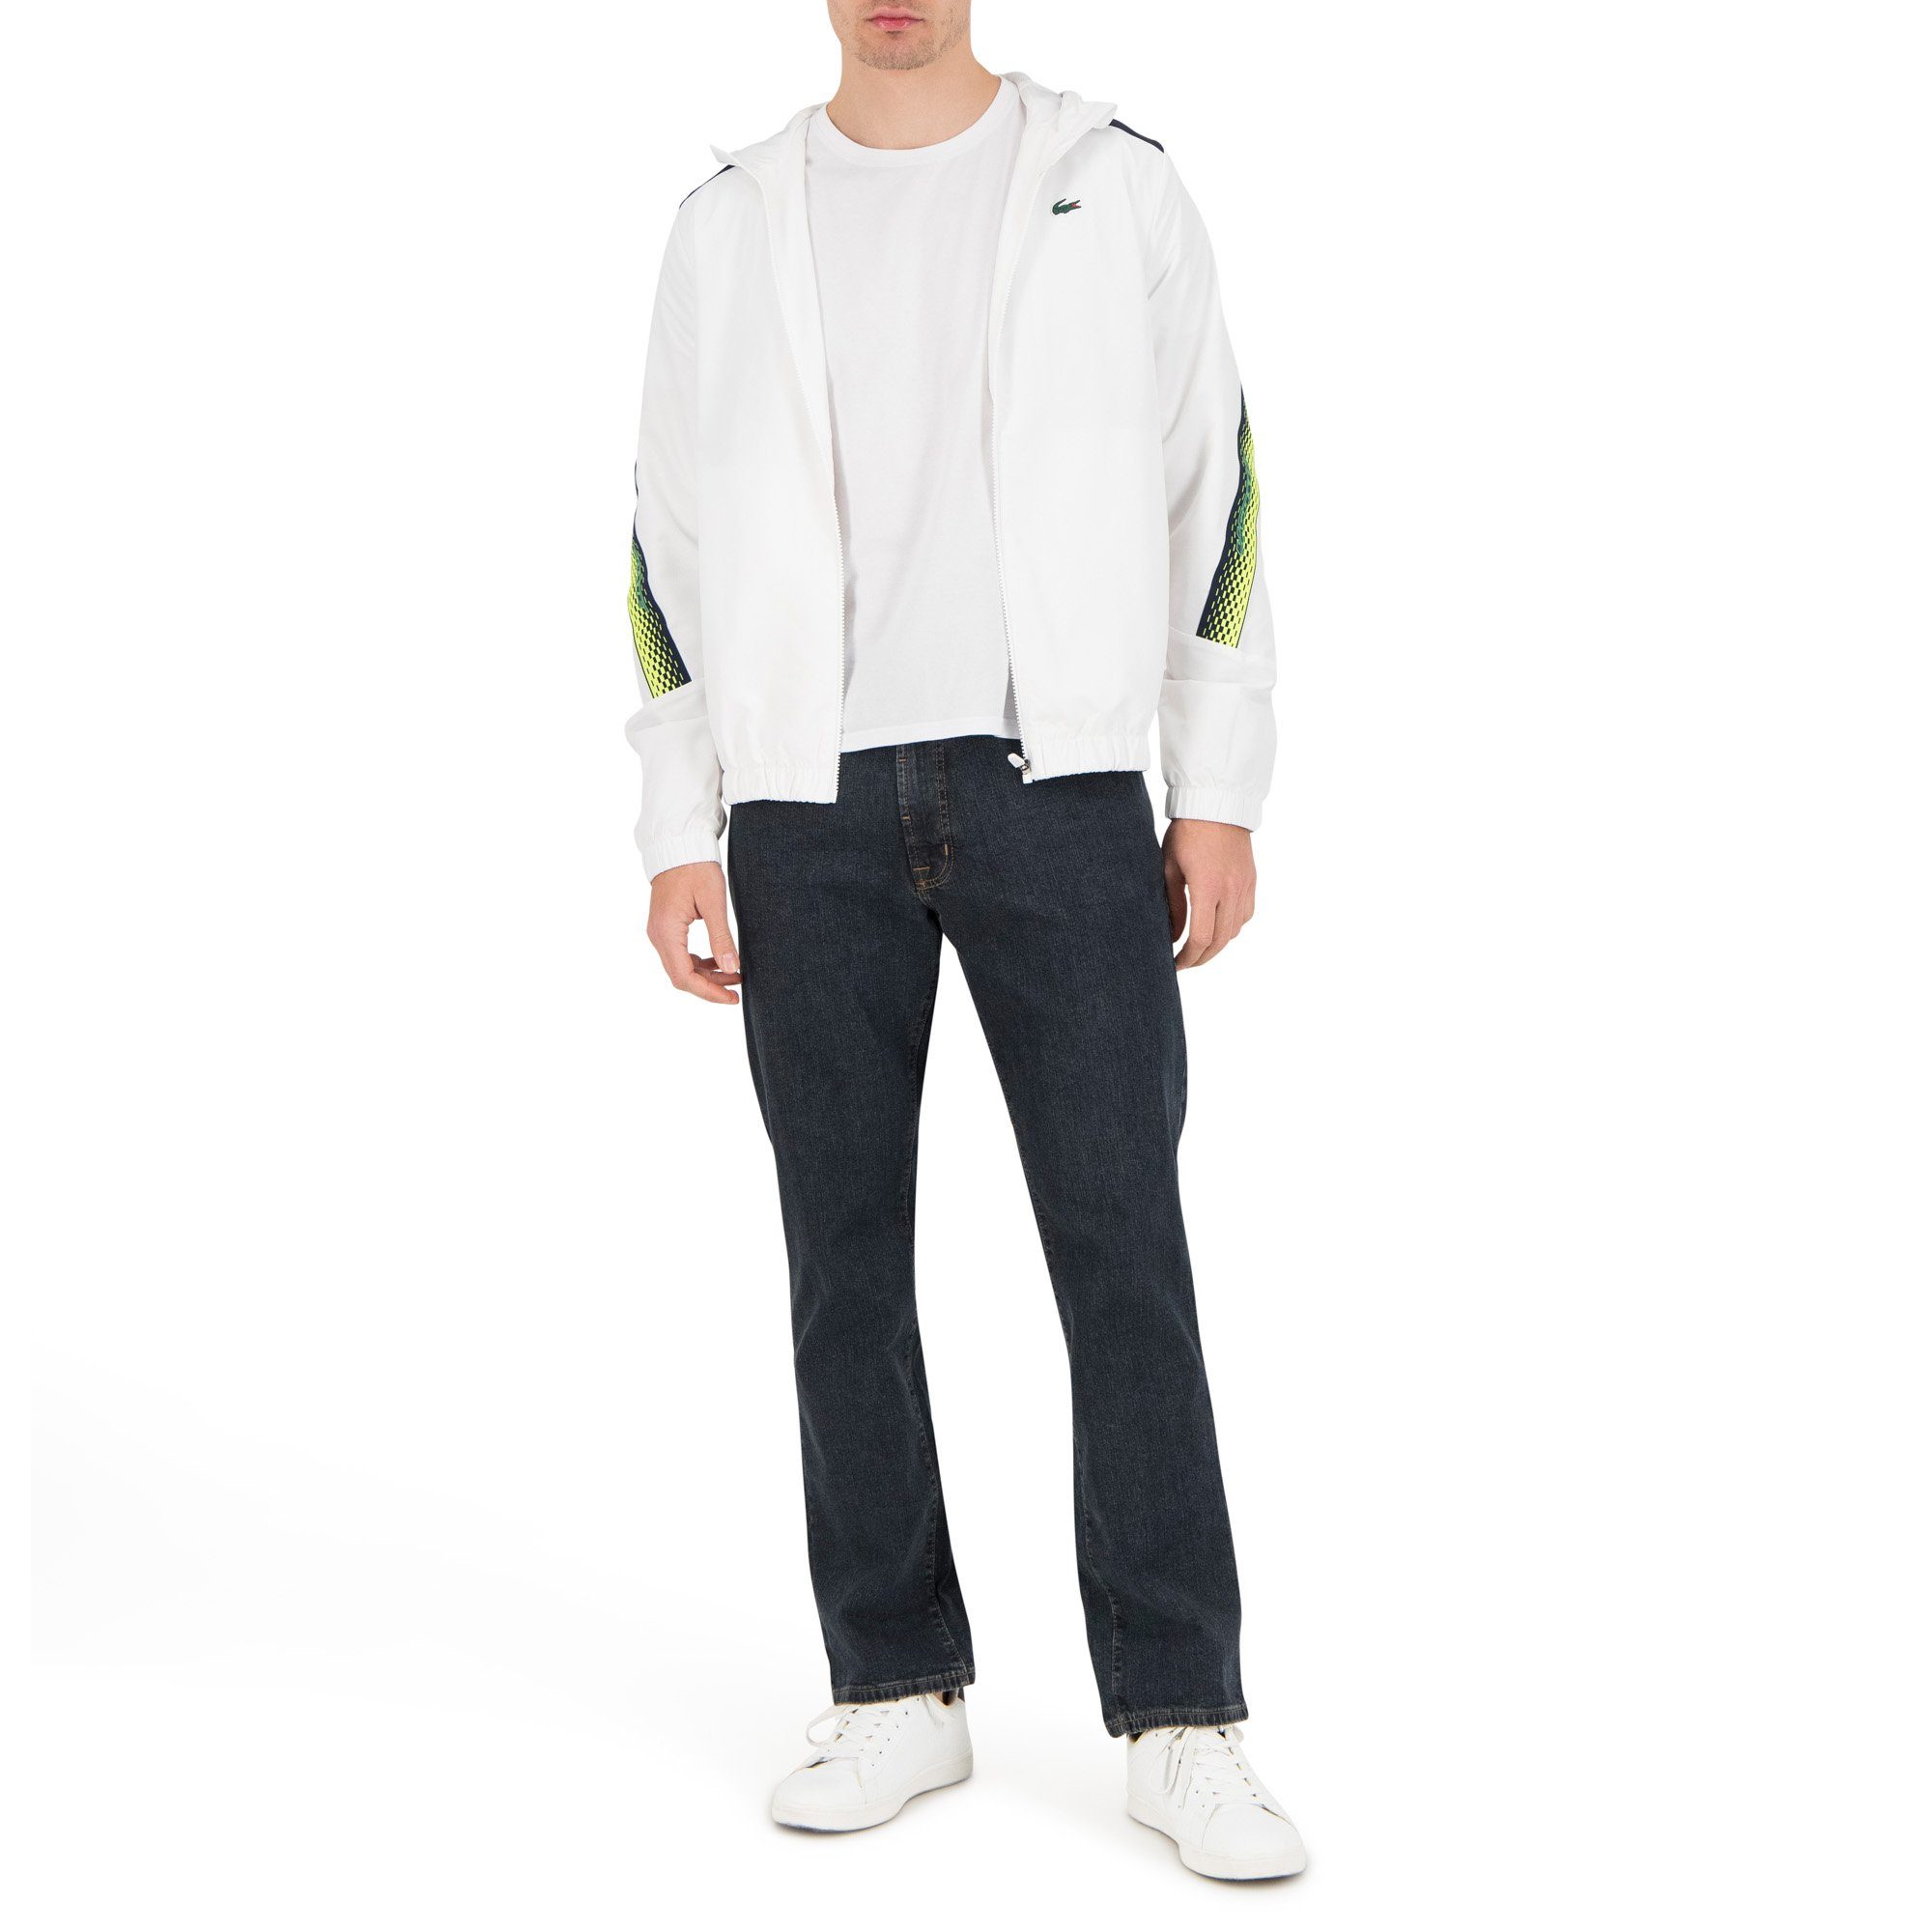 BLUE-ELECTRIC YELLOW (X1I) WHITE/NAVY Funktionsjacke Lacoste